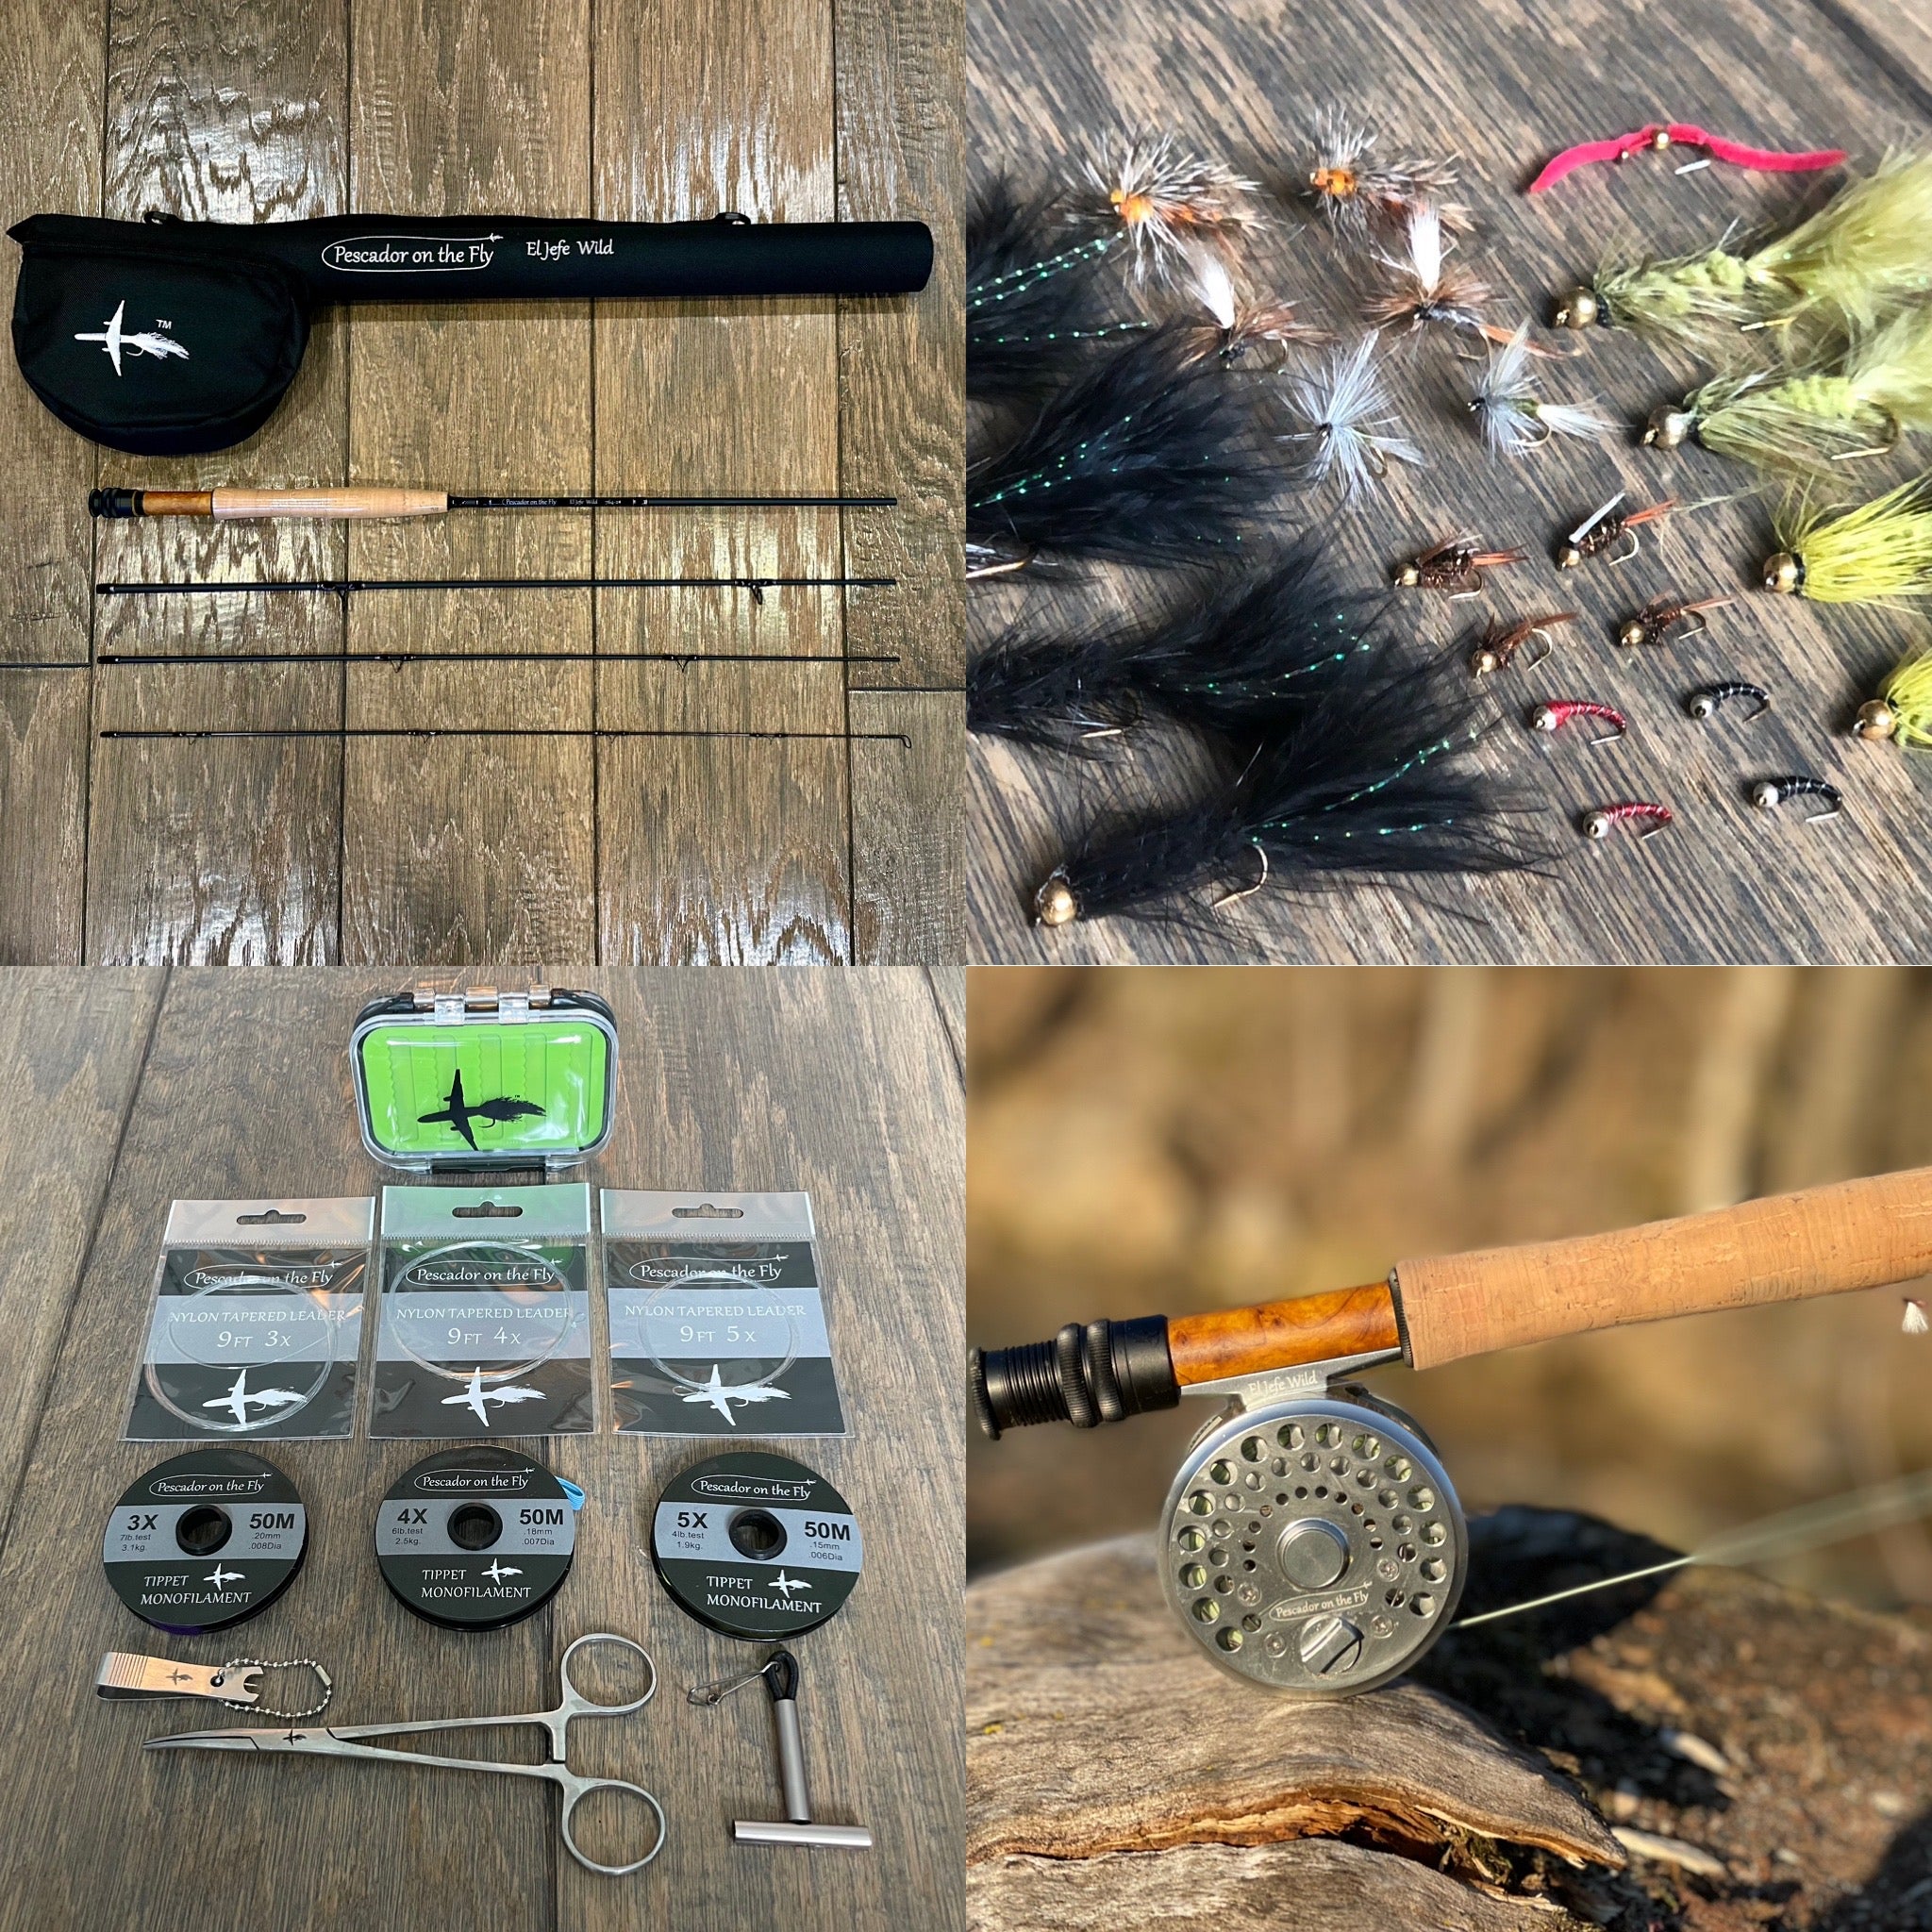 El Jefe Wild Fly Fishing Combo Package | 704 | 7' Four Section 1 Weight Fly Rod And Reel Outfit